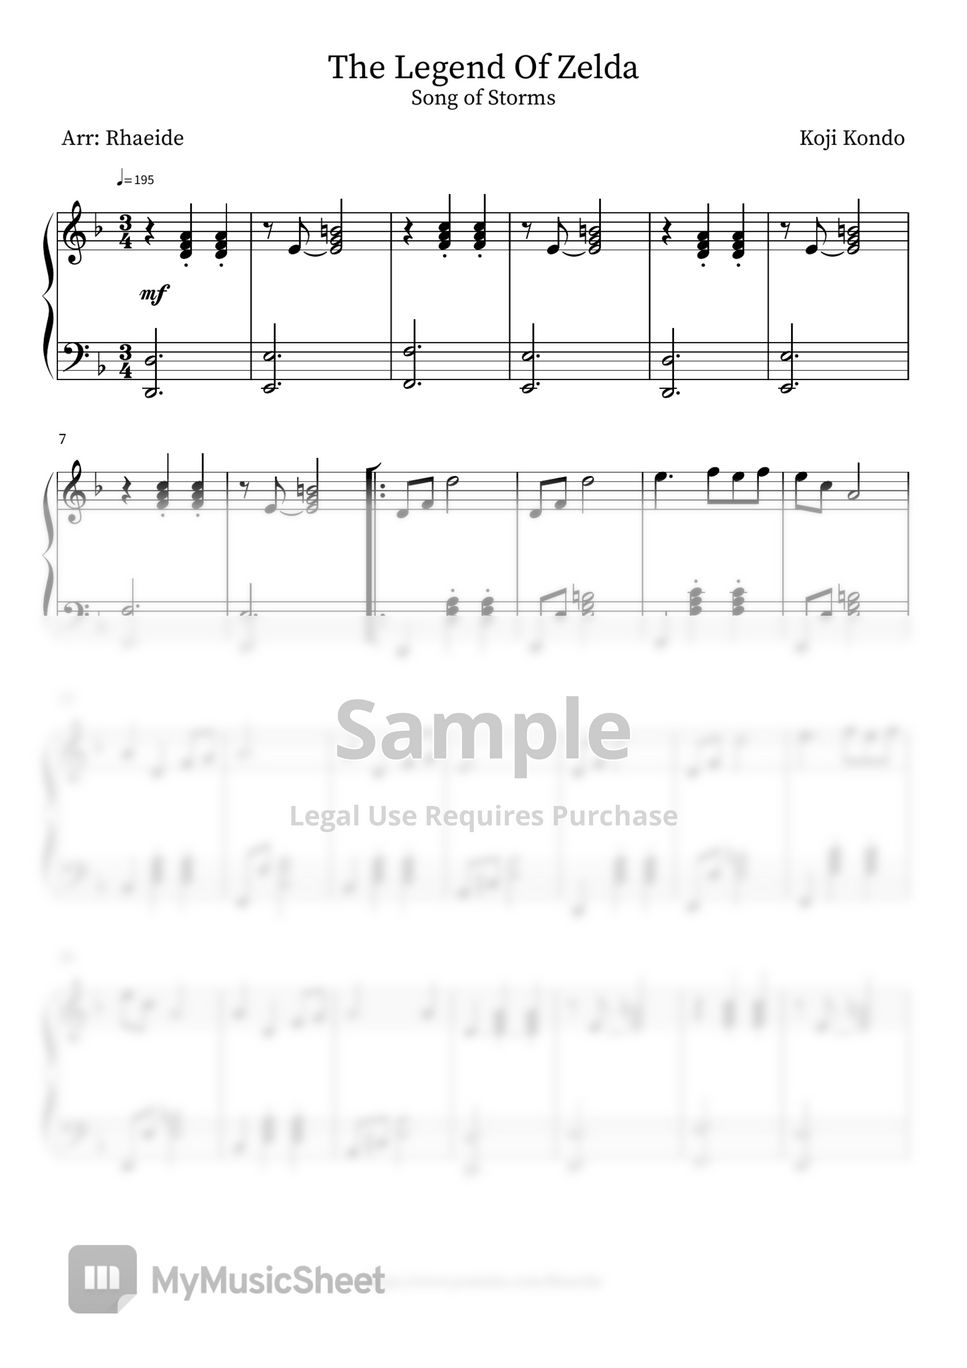 SONG OF STORMS Melodica Sheet music